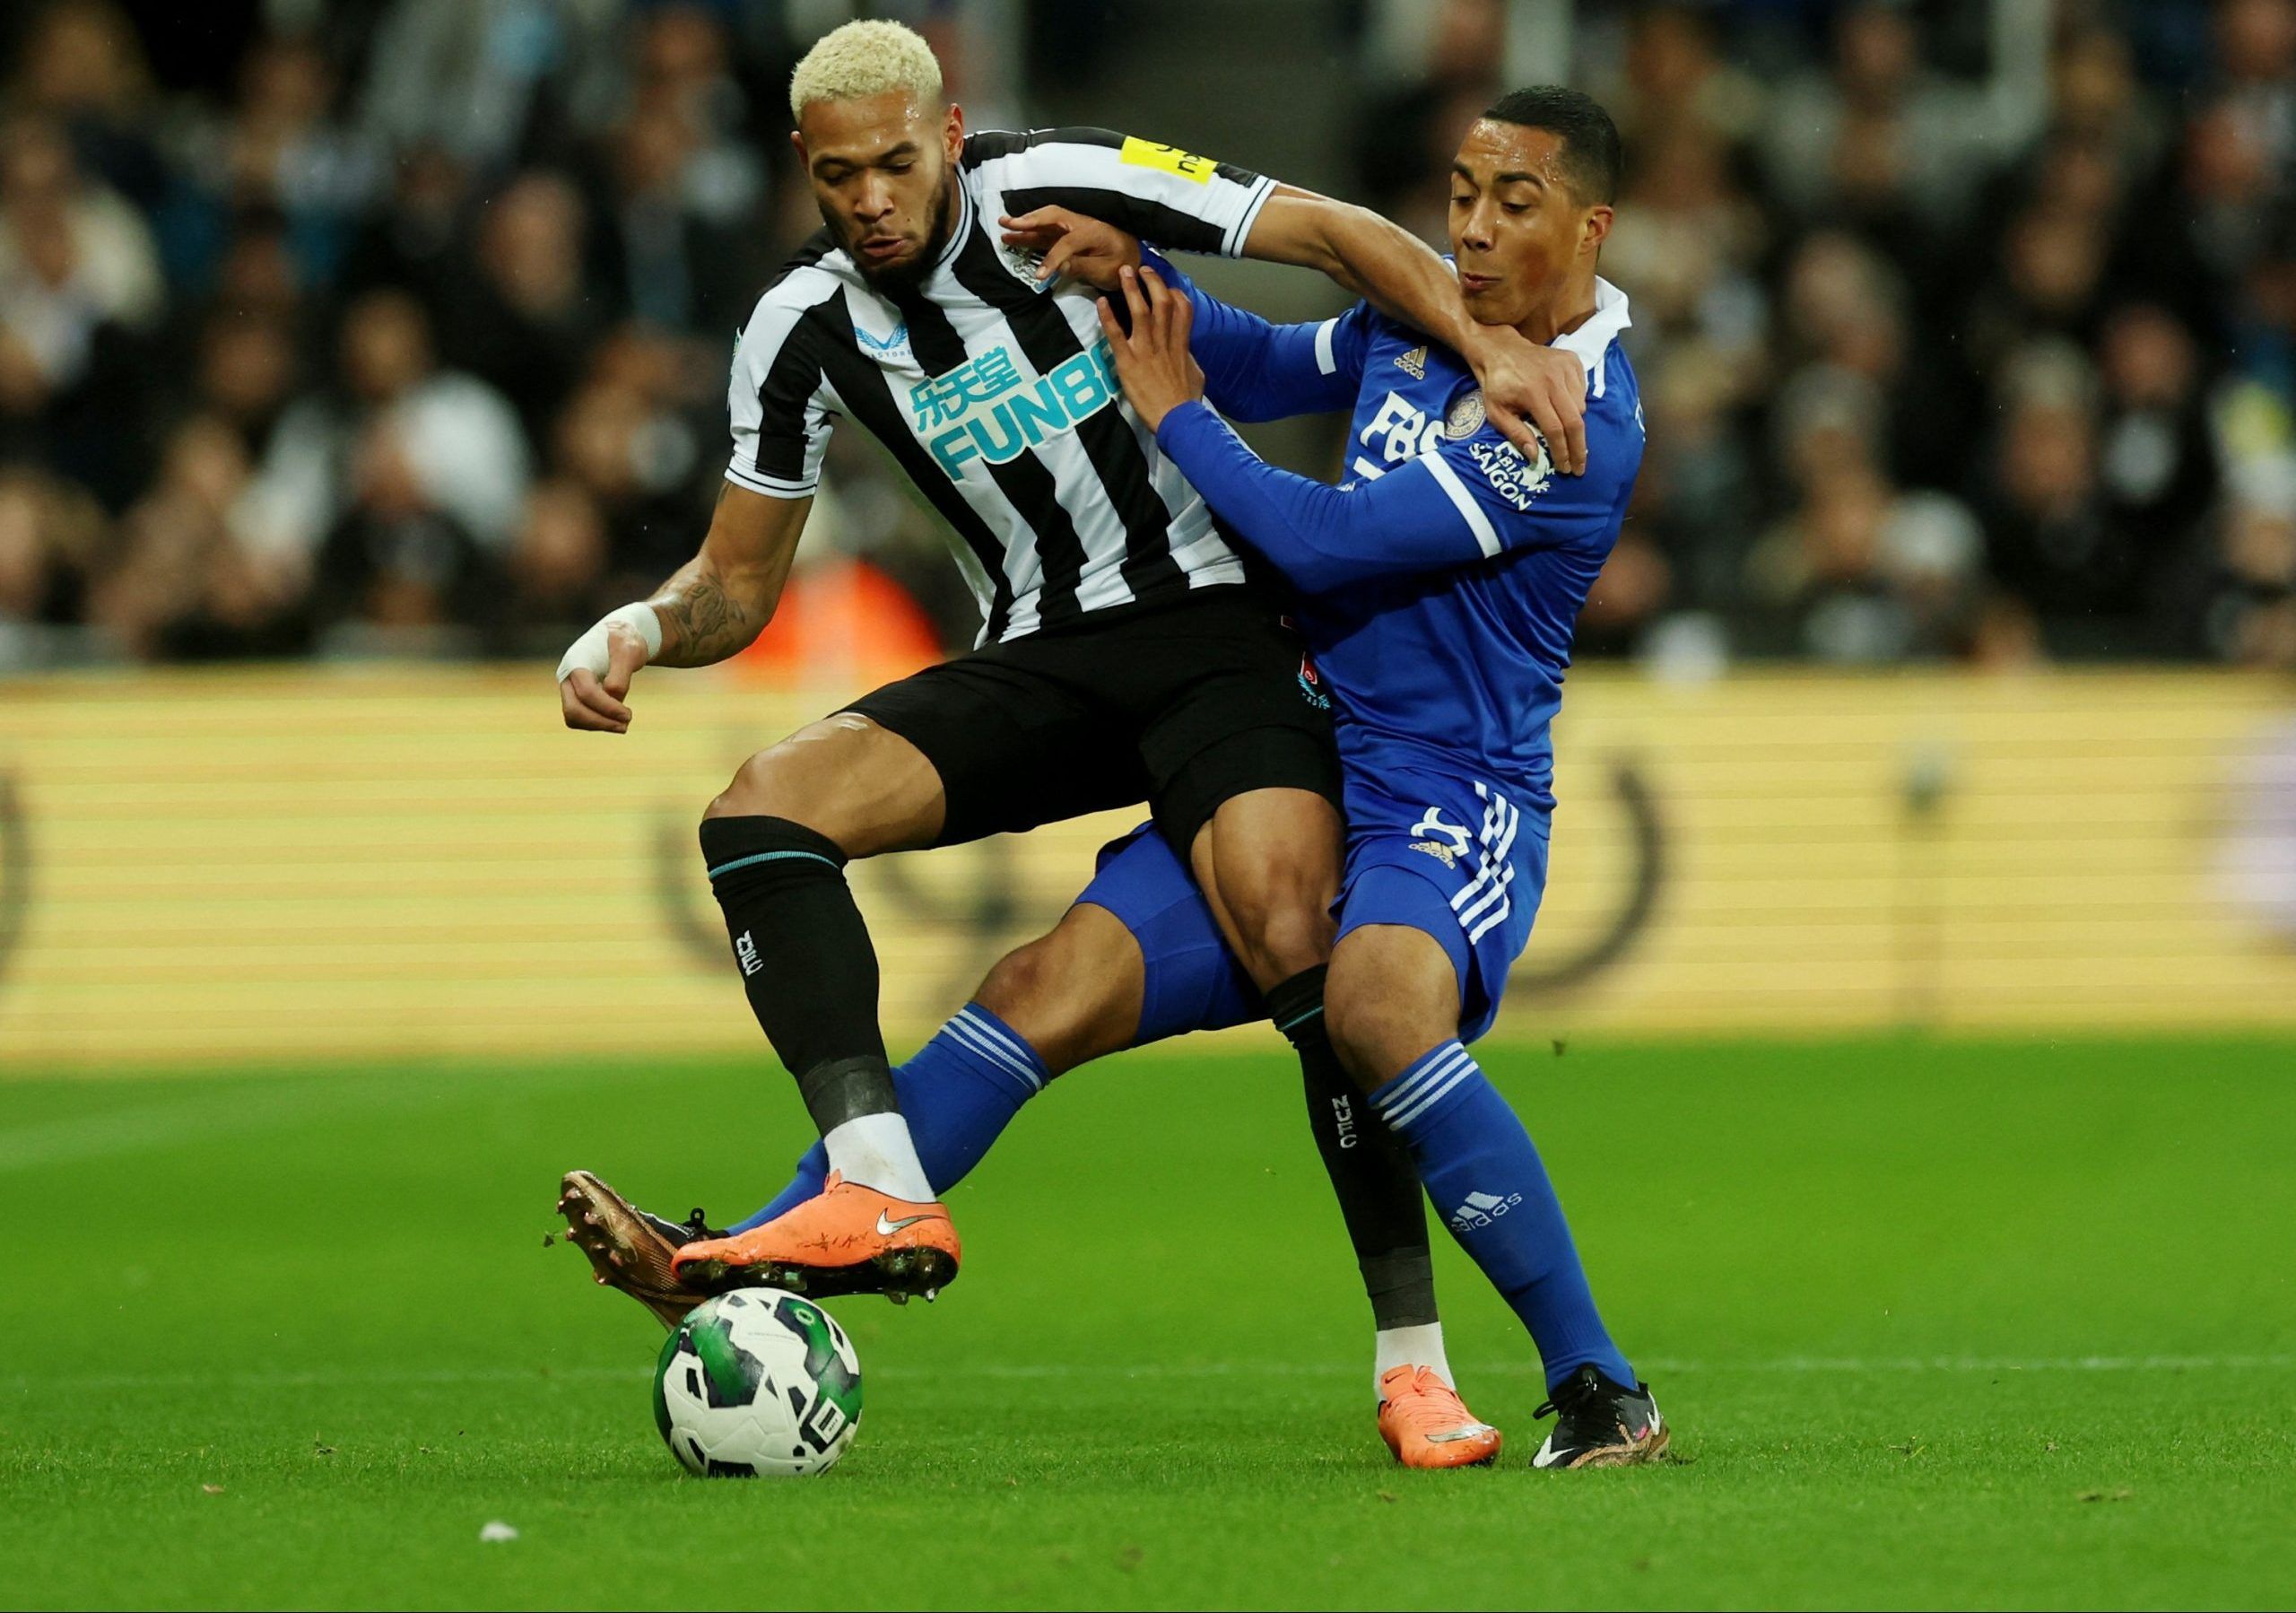 Soccer Football - Carabao Cup - Quarter Final - Newcastle United v Leicester City - St James' Park, Newcastle, Britain - January 10, 2023 Newcastle United's Joelinton in action with Leicester City's Youri Tielemans Action Images via Reuters/Lee Smith EDITORIAL USE ONLY. No use with unauthorized audio, video, data, fixture lists, club/league logos or 'live' services. Online in-match use limited to 75 images, no video emulation. No use in betting, games or single club /league/player publications. 